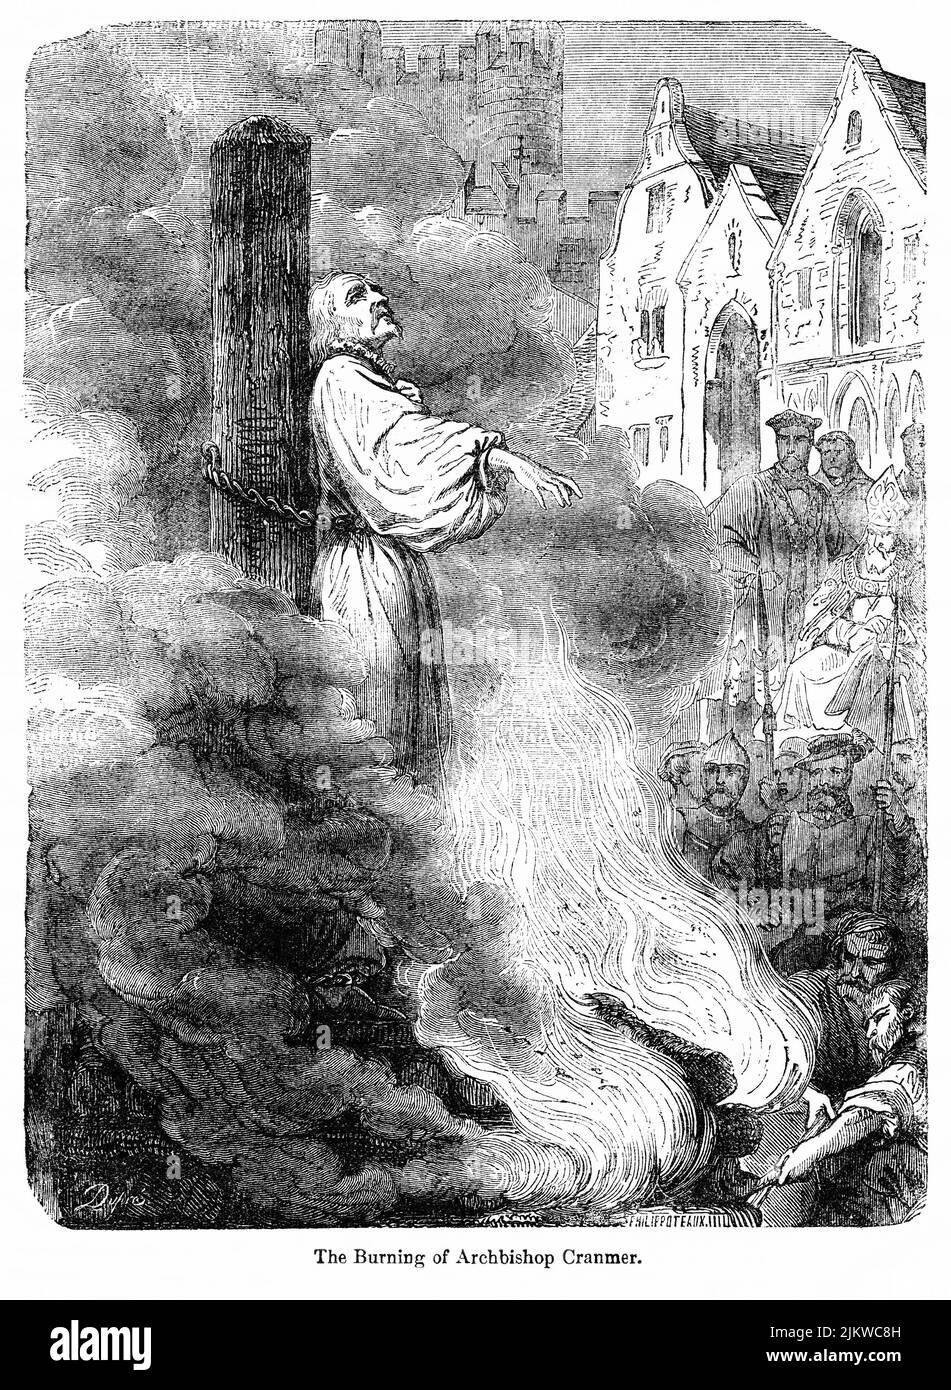 The Burning of Archbishop Cranmer, Illustration from the Book, 'John Cassel’s Illustrated History of England, Volume II', text by William Howitt, Cassell, Petter, and Galpin, London, 1858 Stock Photo